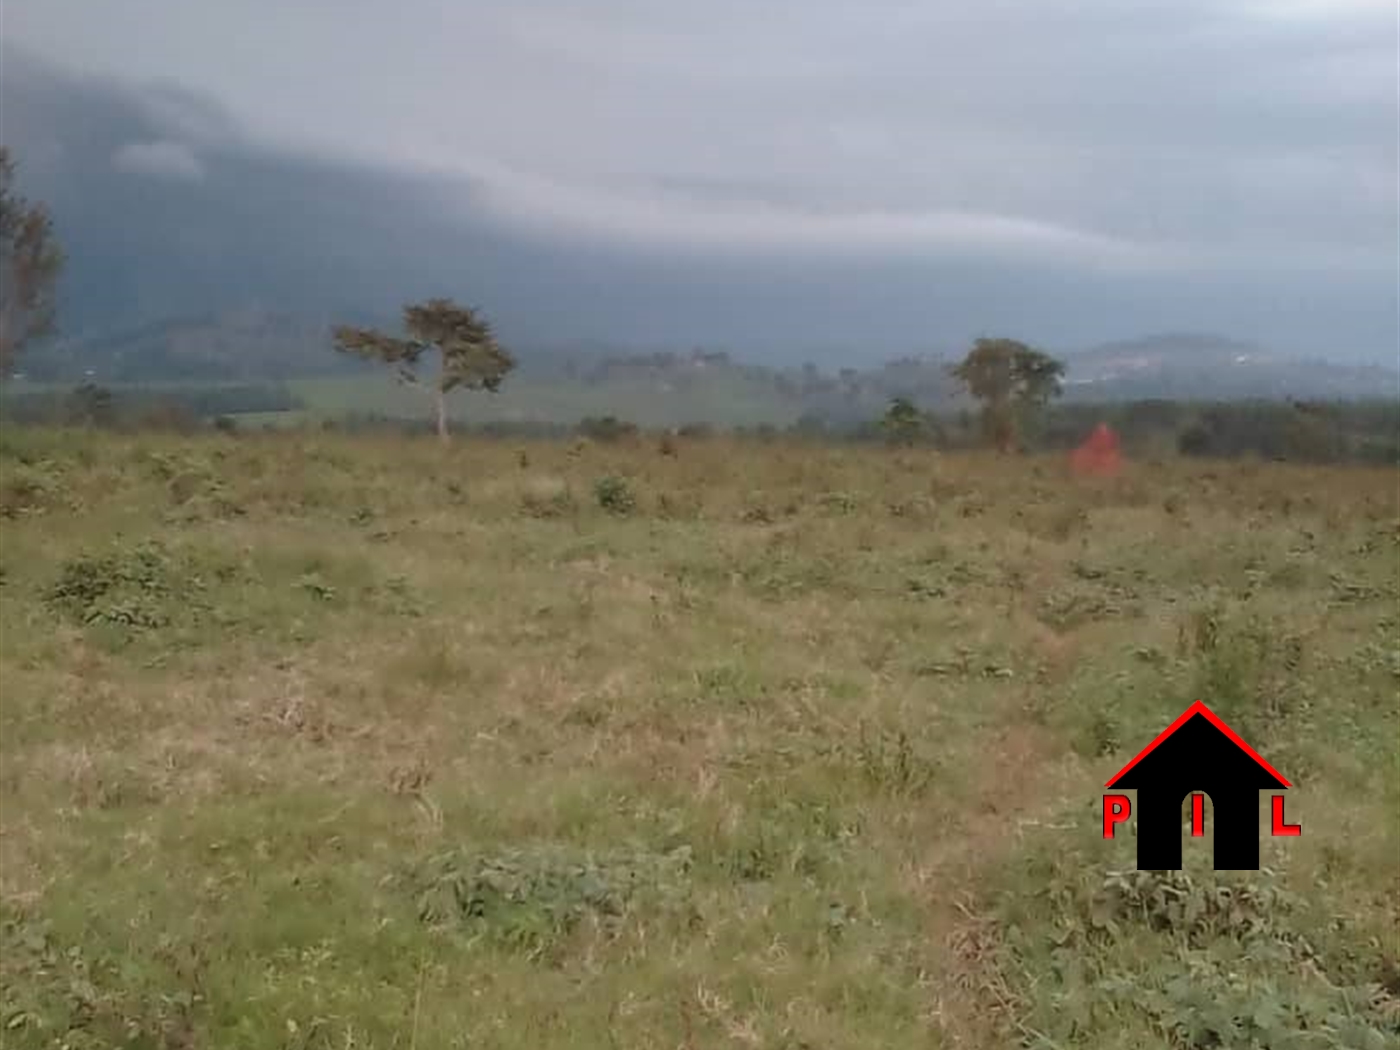 Agricultural Land for sale in Mijjera Nakasongola